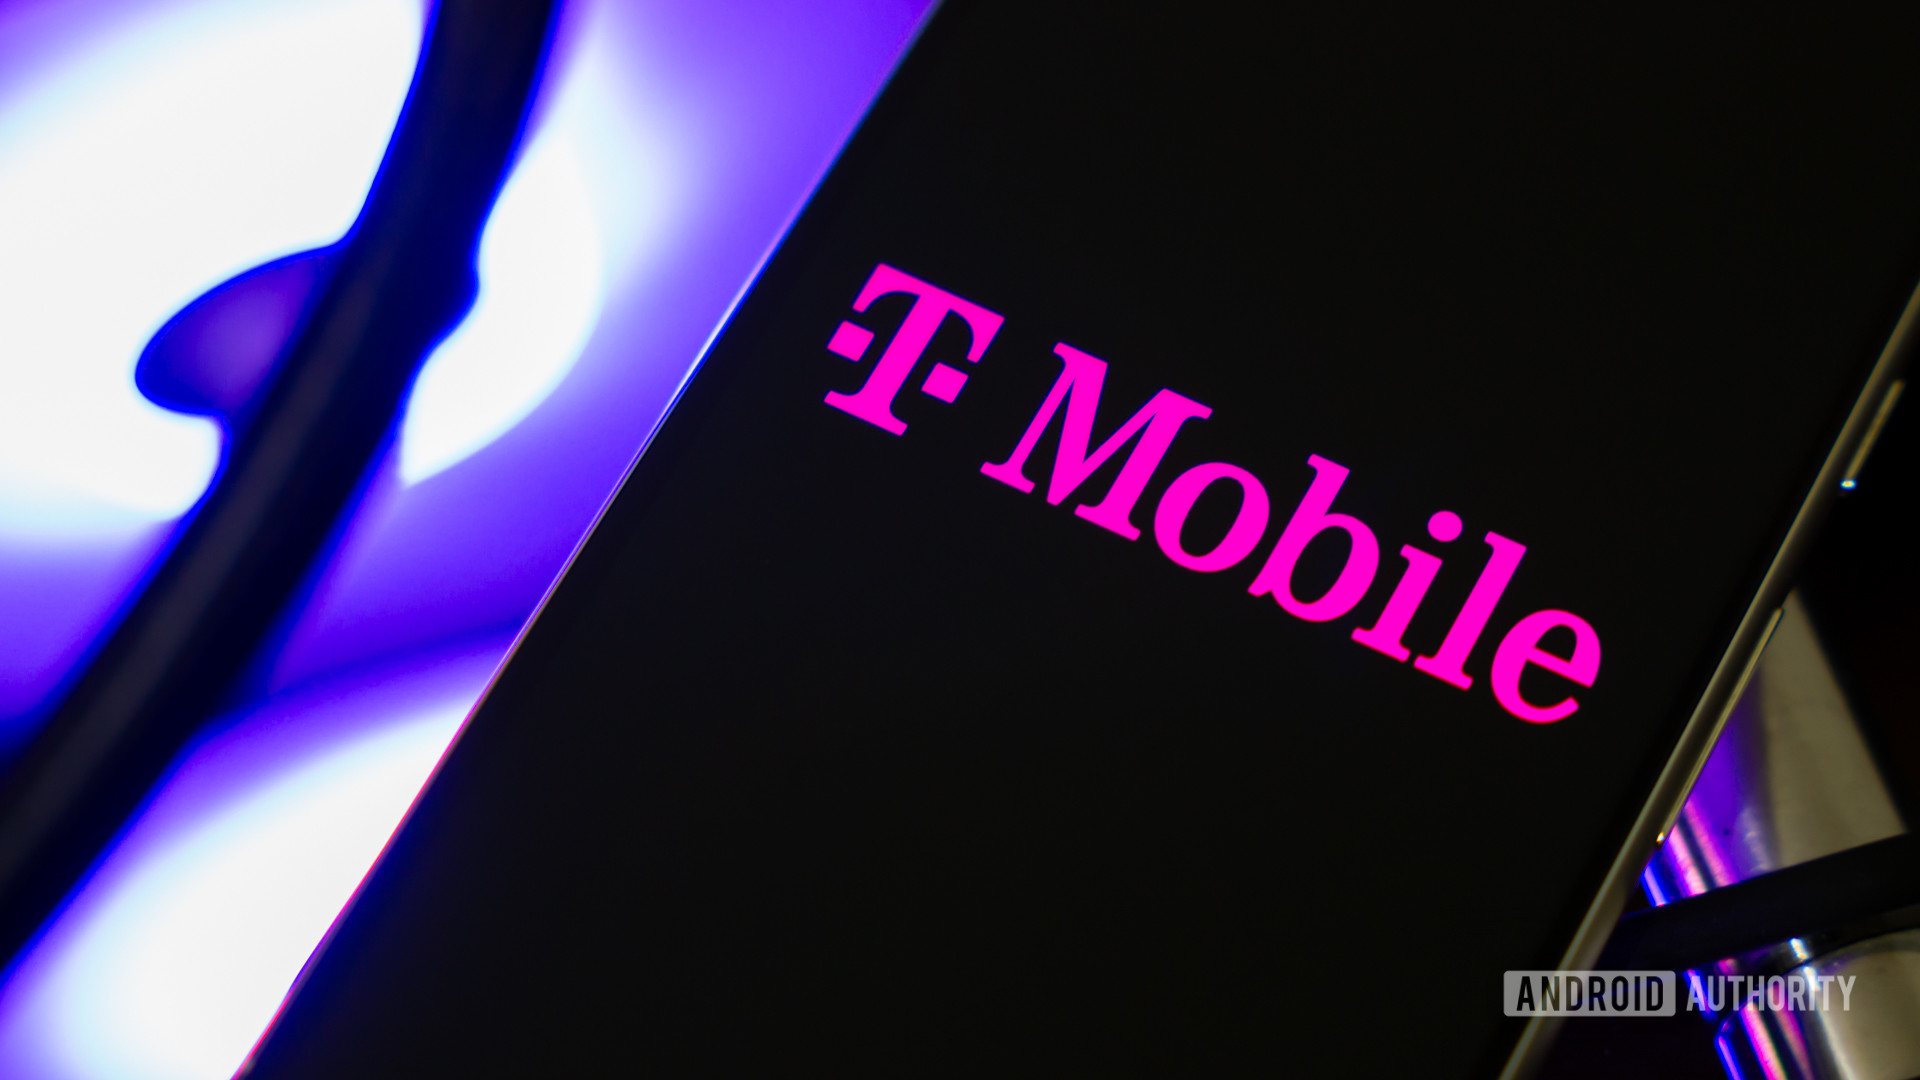 T-Mobile employees report being lured into scamming customers (2 minute read)